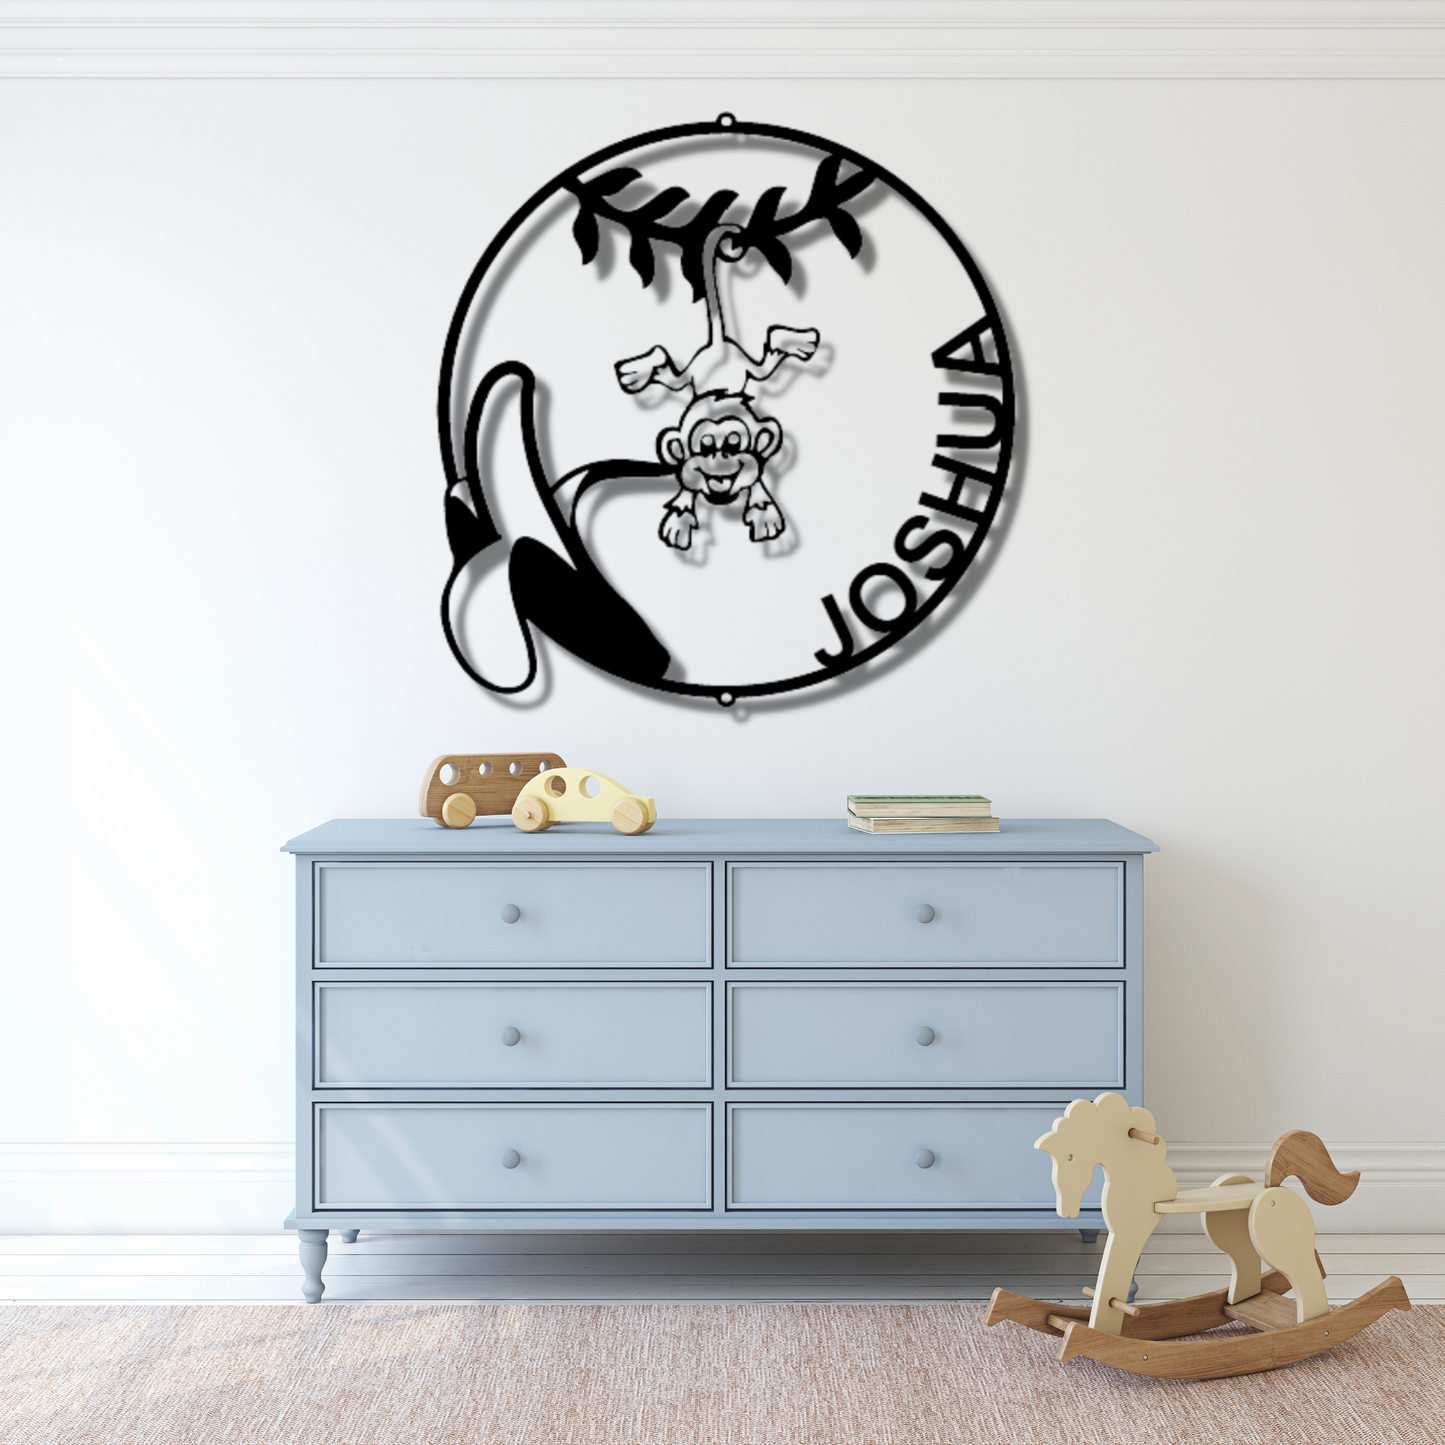 Our Little Monkey Monogram - Steel Sign, Personalized Metal Wall Decor, House Decor, Wall Art, Metal Signs, Metal Decorative Sign